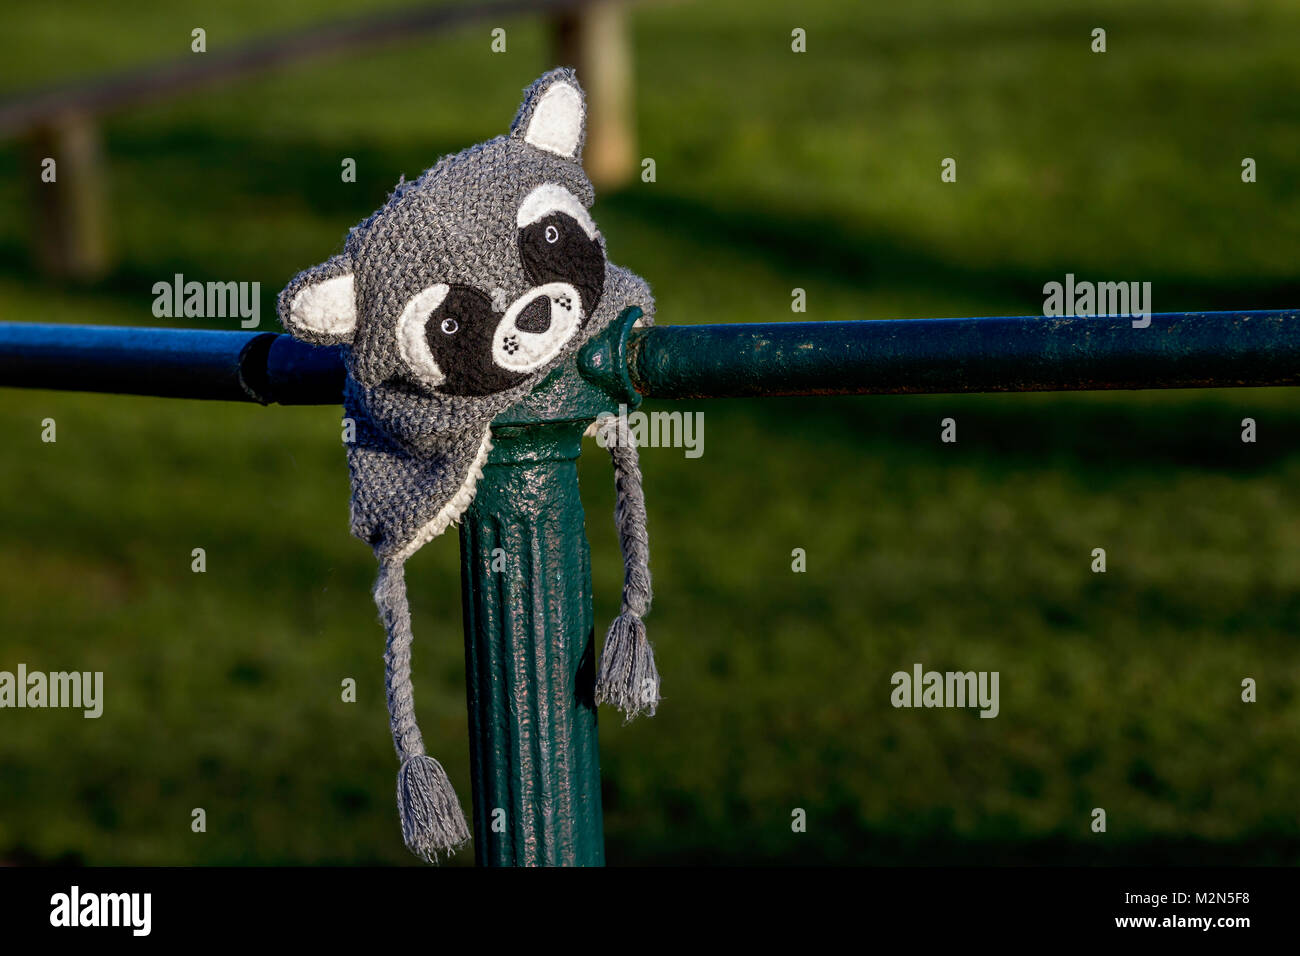 Forgotten hat put on metal fencing. Stock Photo